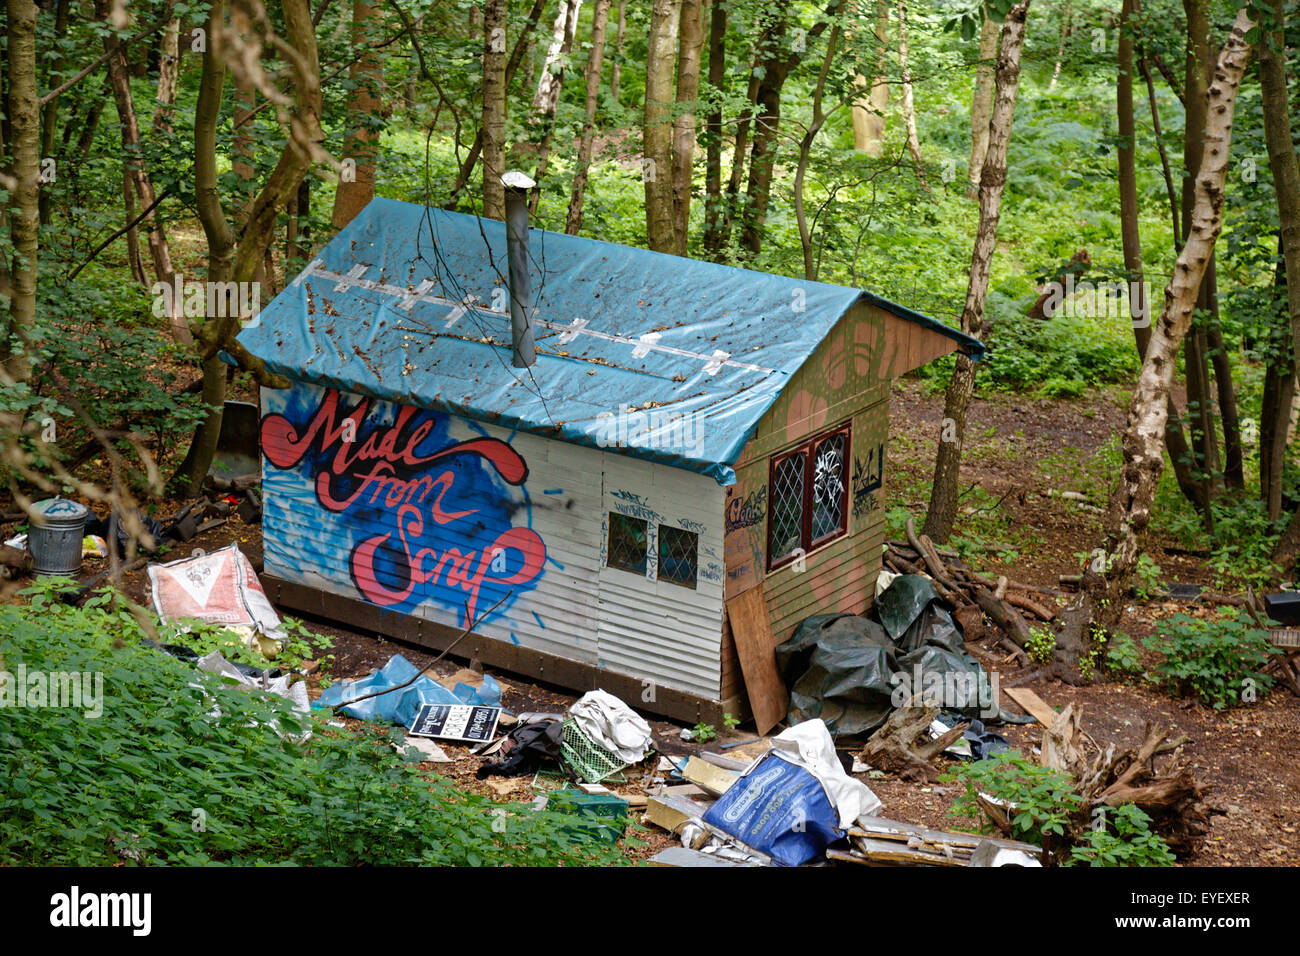 An 'Eco Village' home in woodland with 'Made from Scrap' painted on a wall  & surrounded by rubbish Stock Photo - Alamy